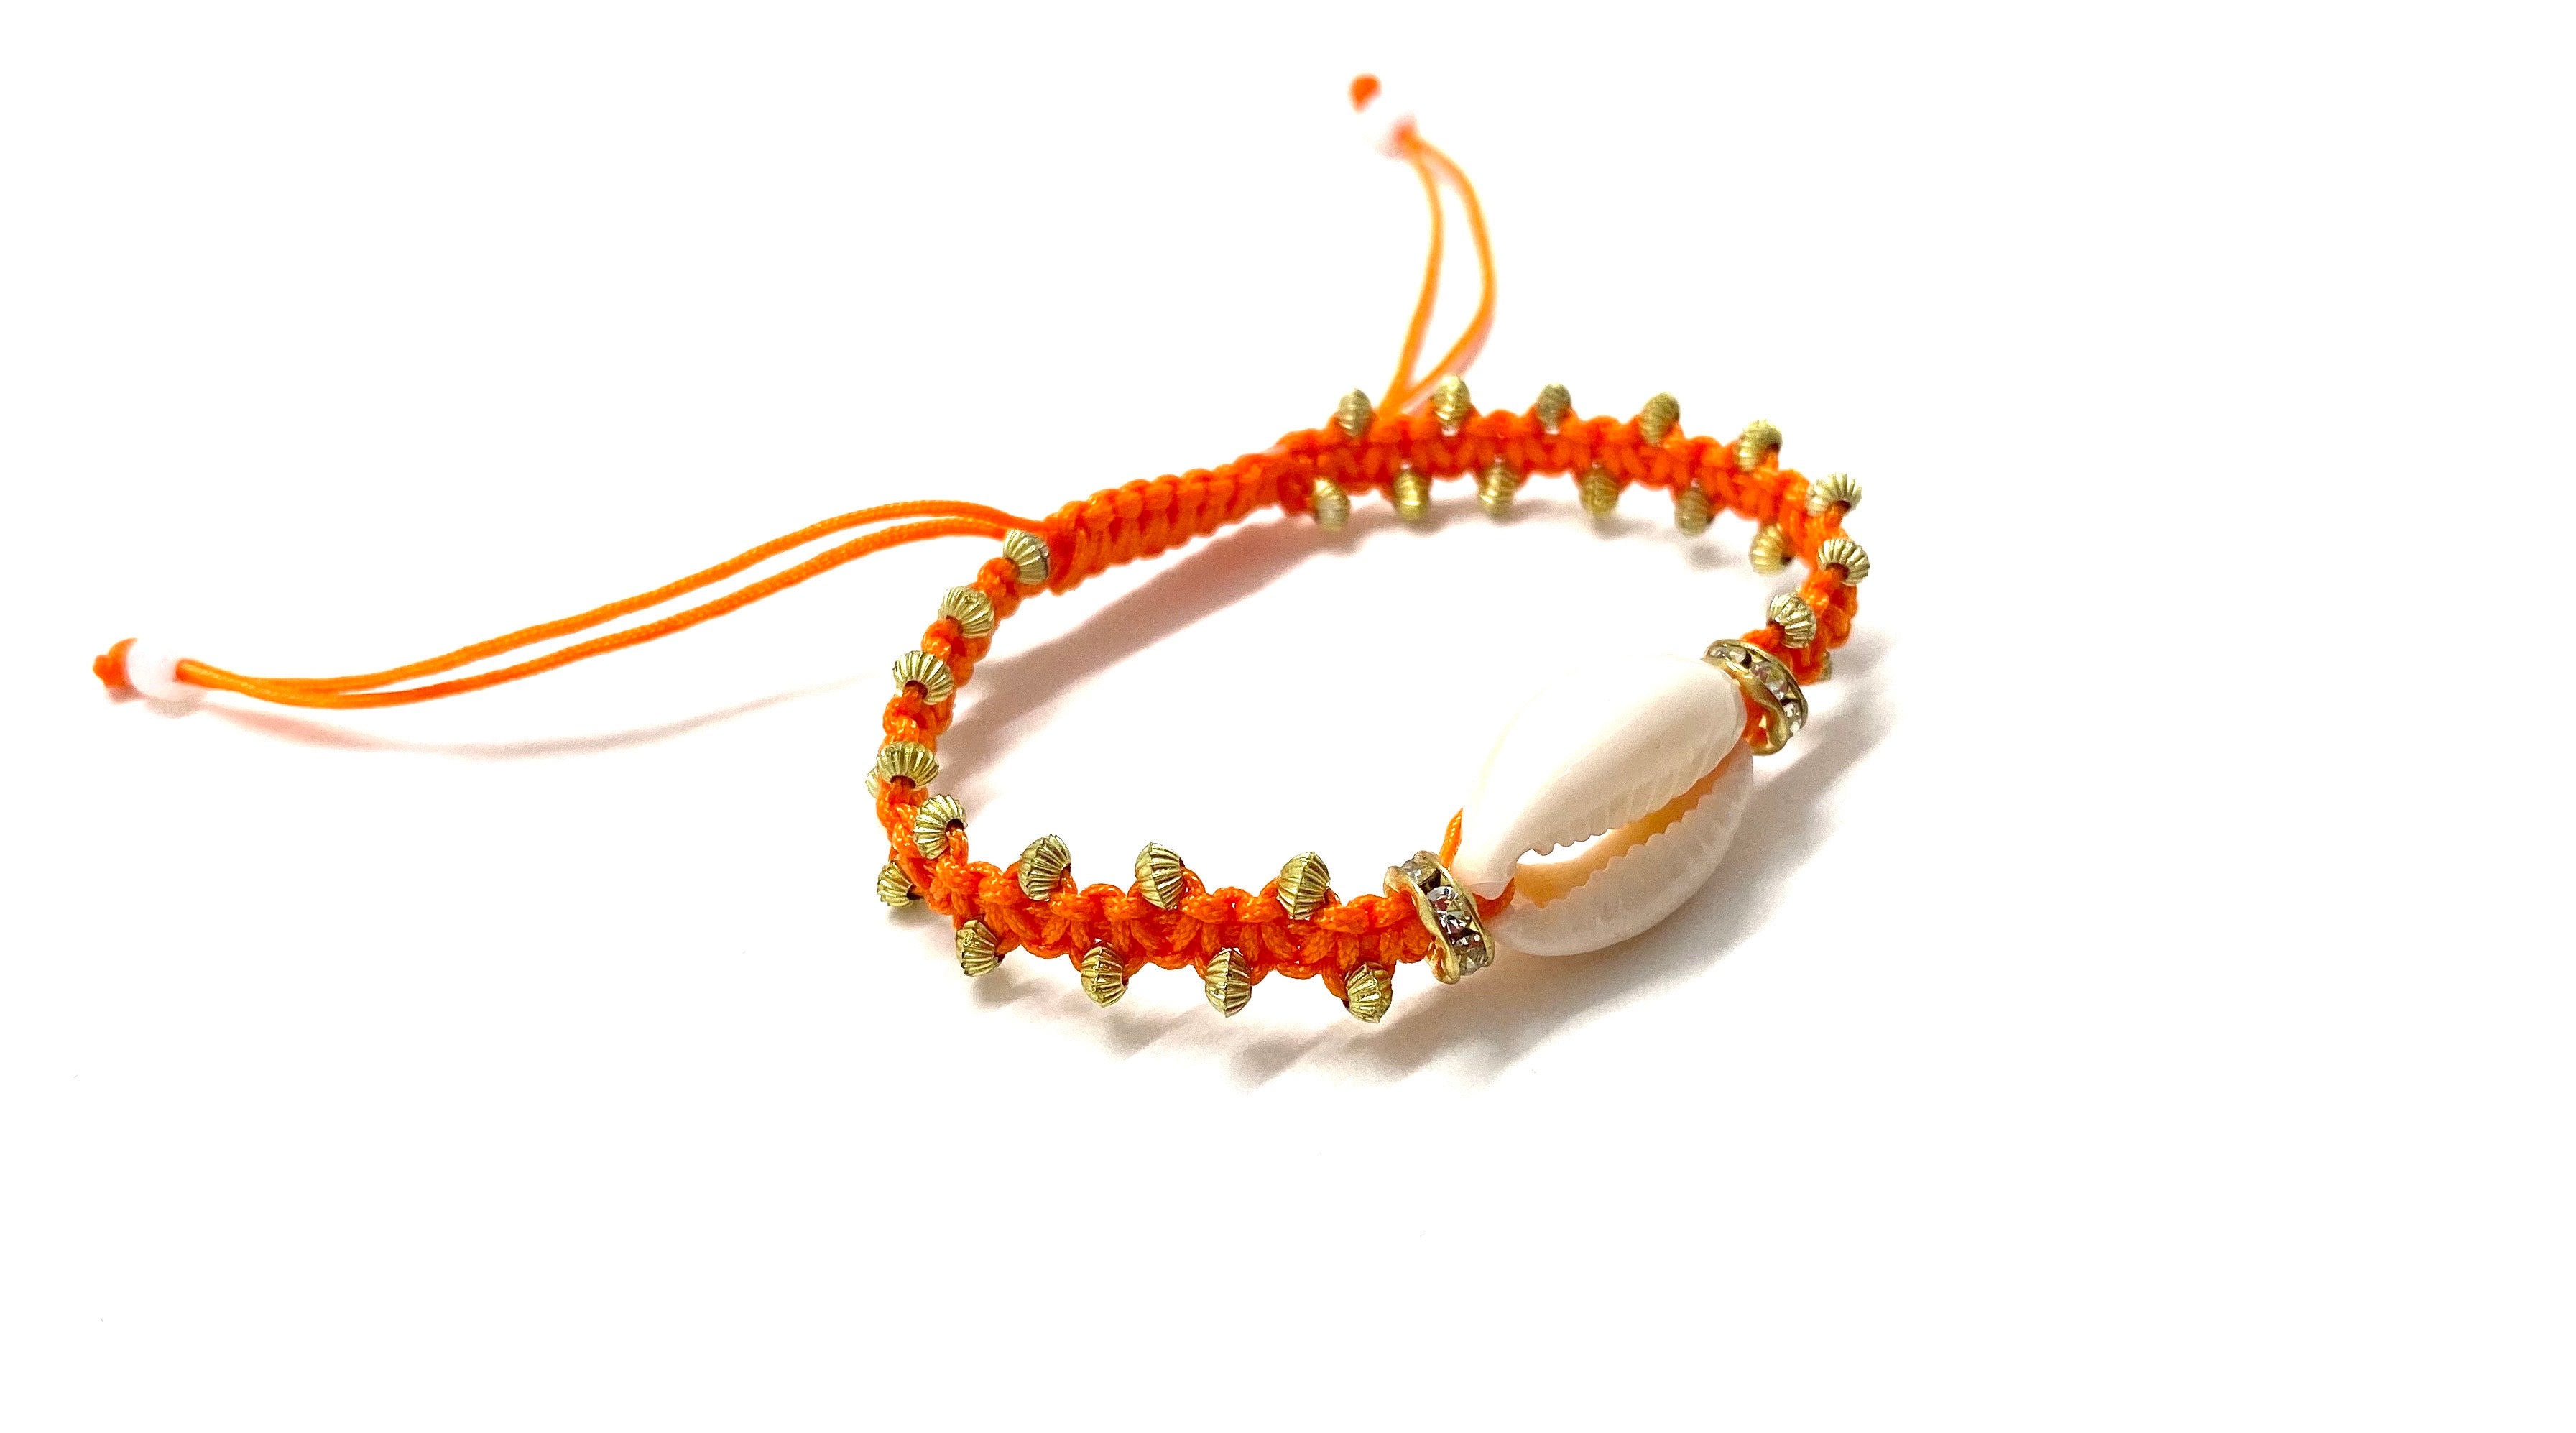 Natural shell bracelet with gold toupee on orange braided cord